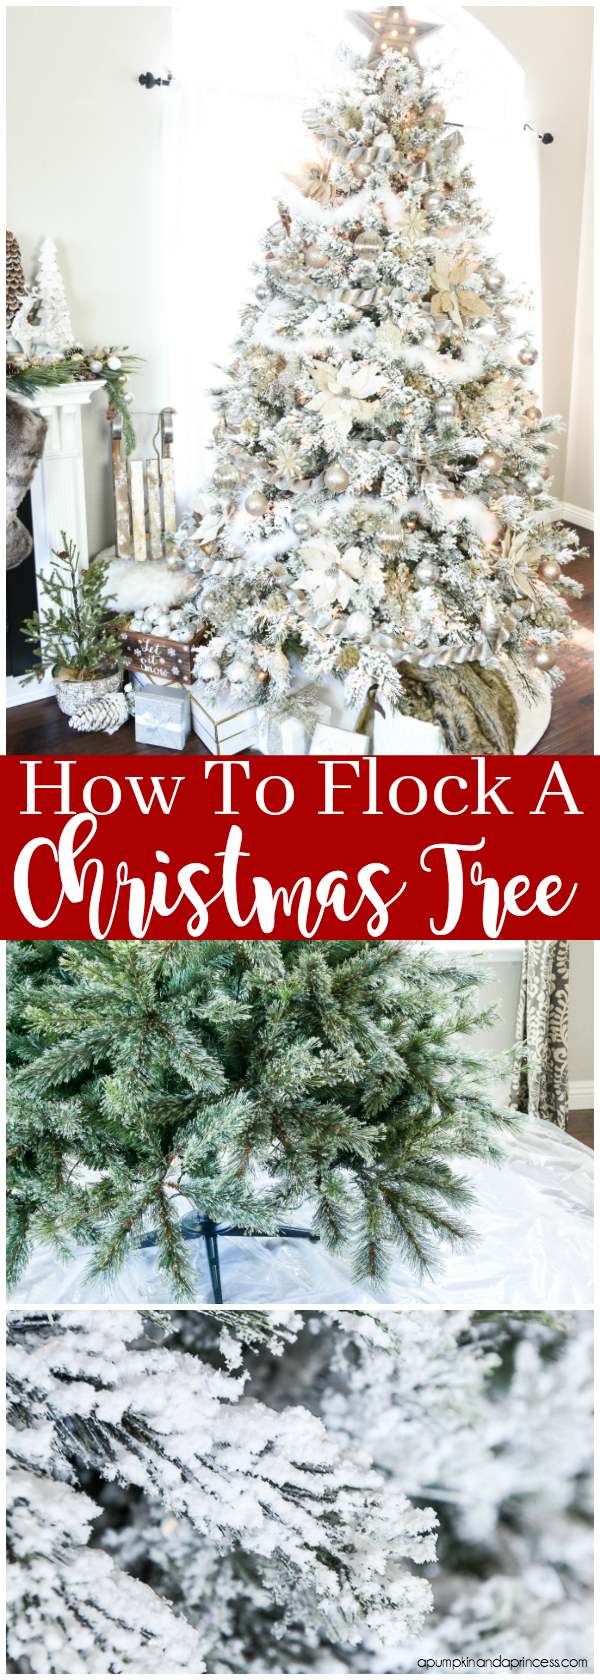 How to flock a Christmas tree – create a snow effect on your artificial tree with this easy DIY Flocking Tutorial.